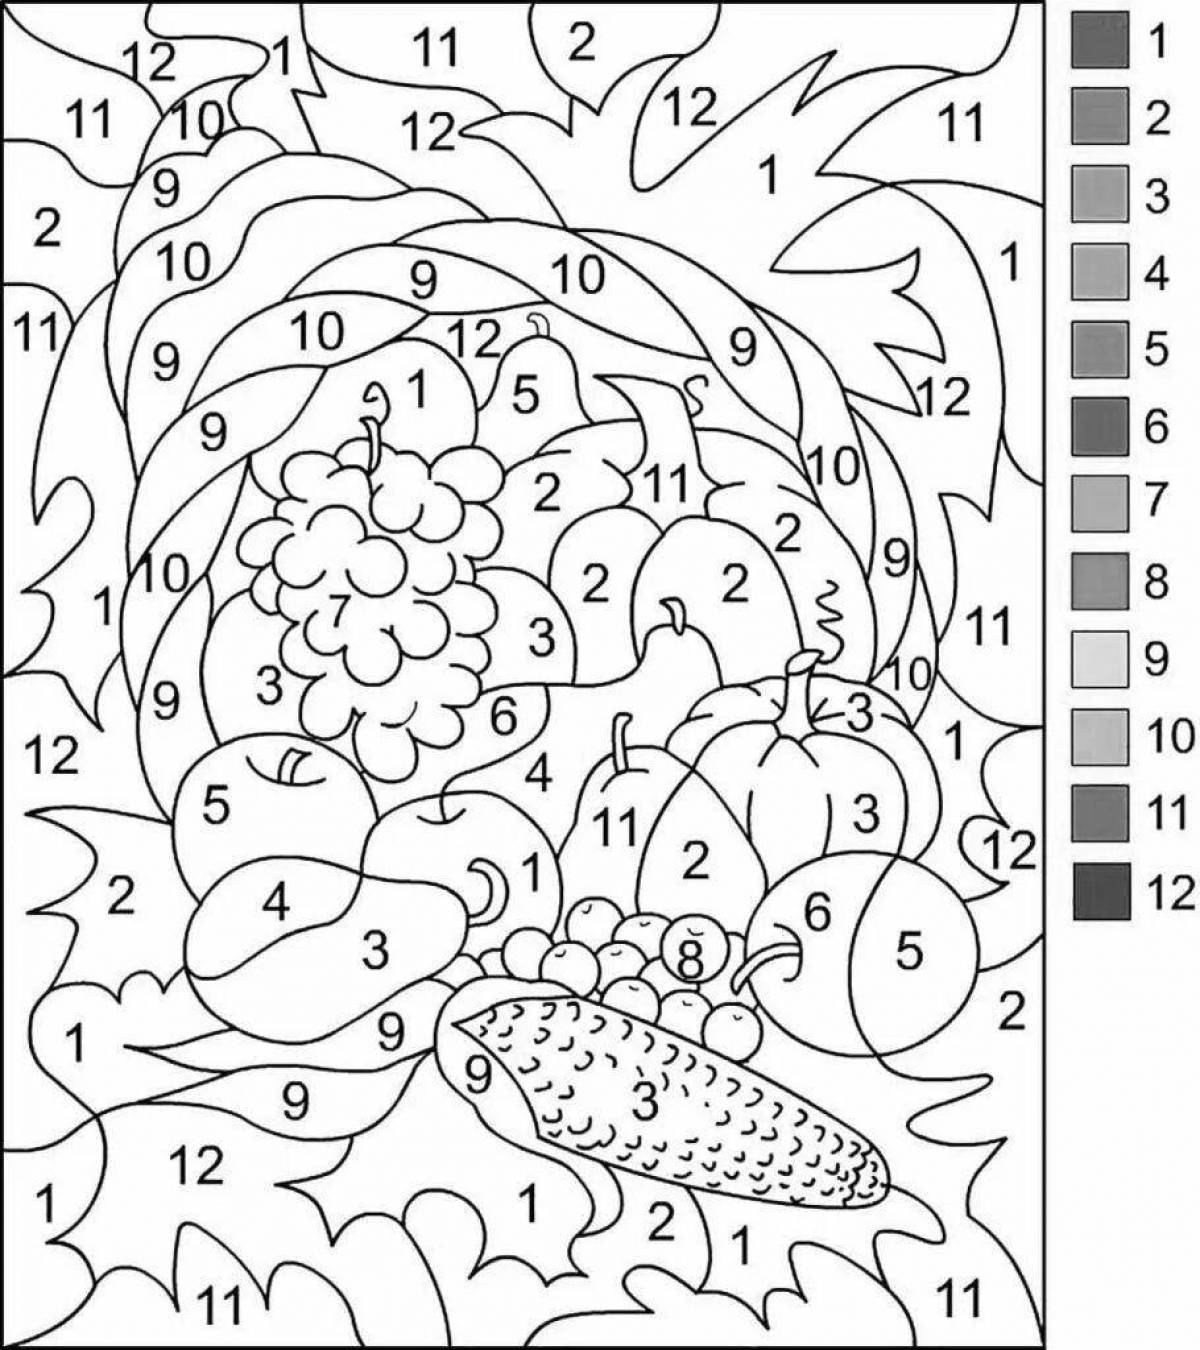 Colour fun coloring for free by numbers